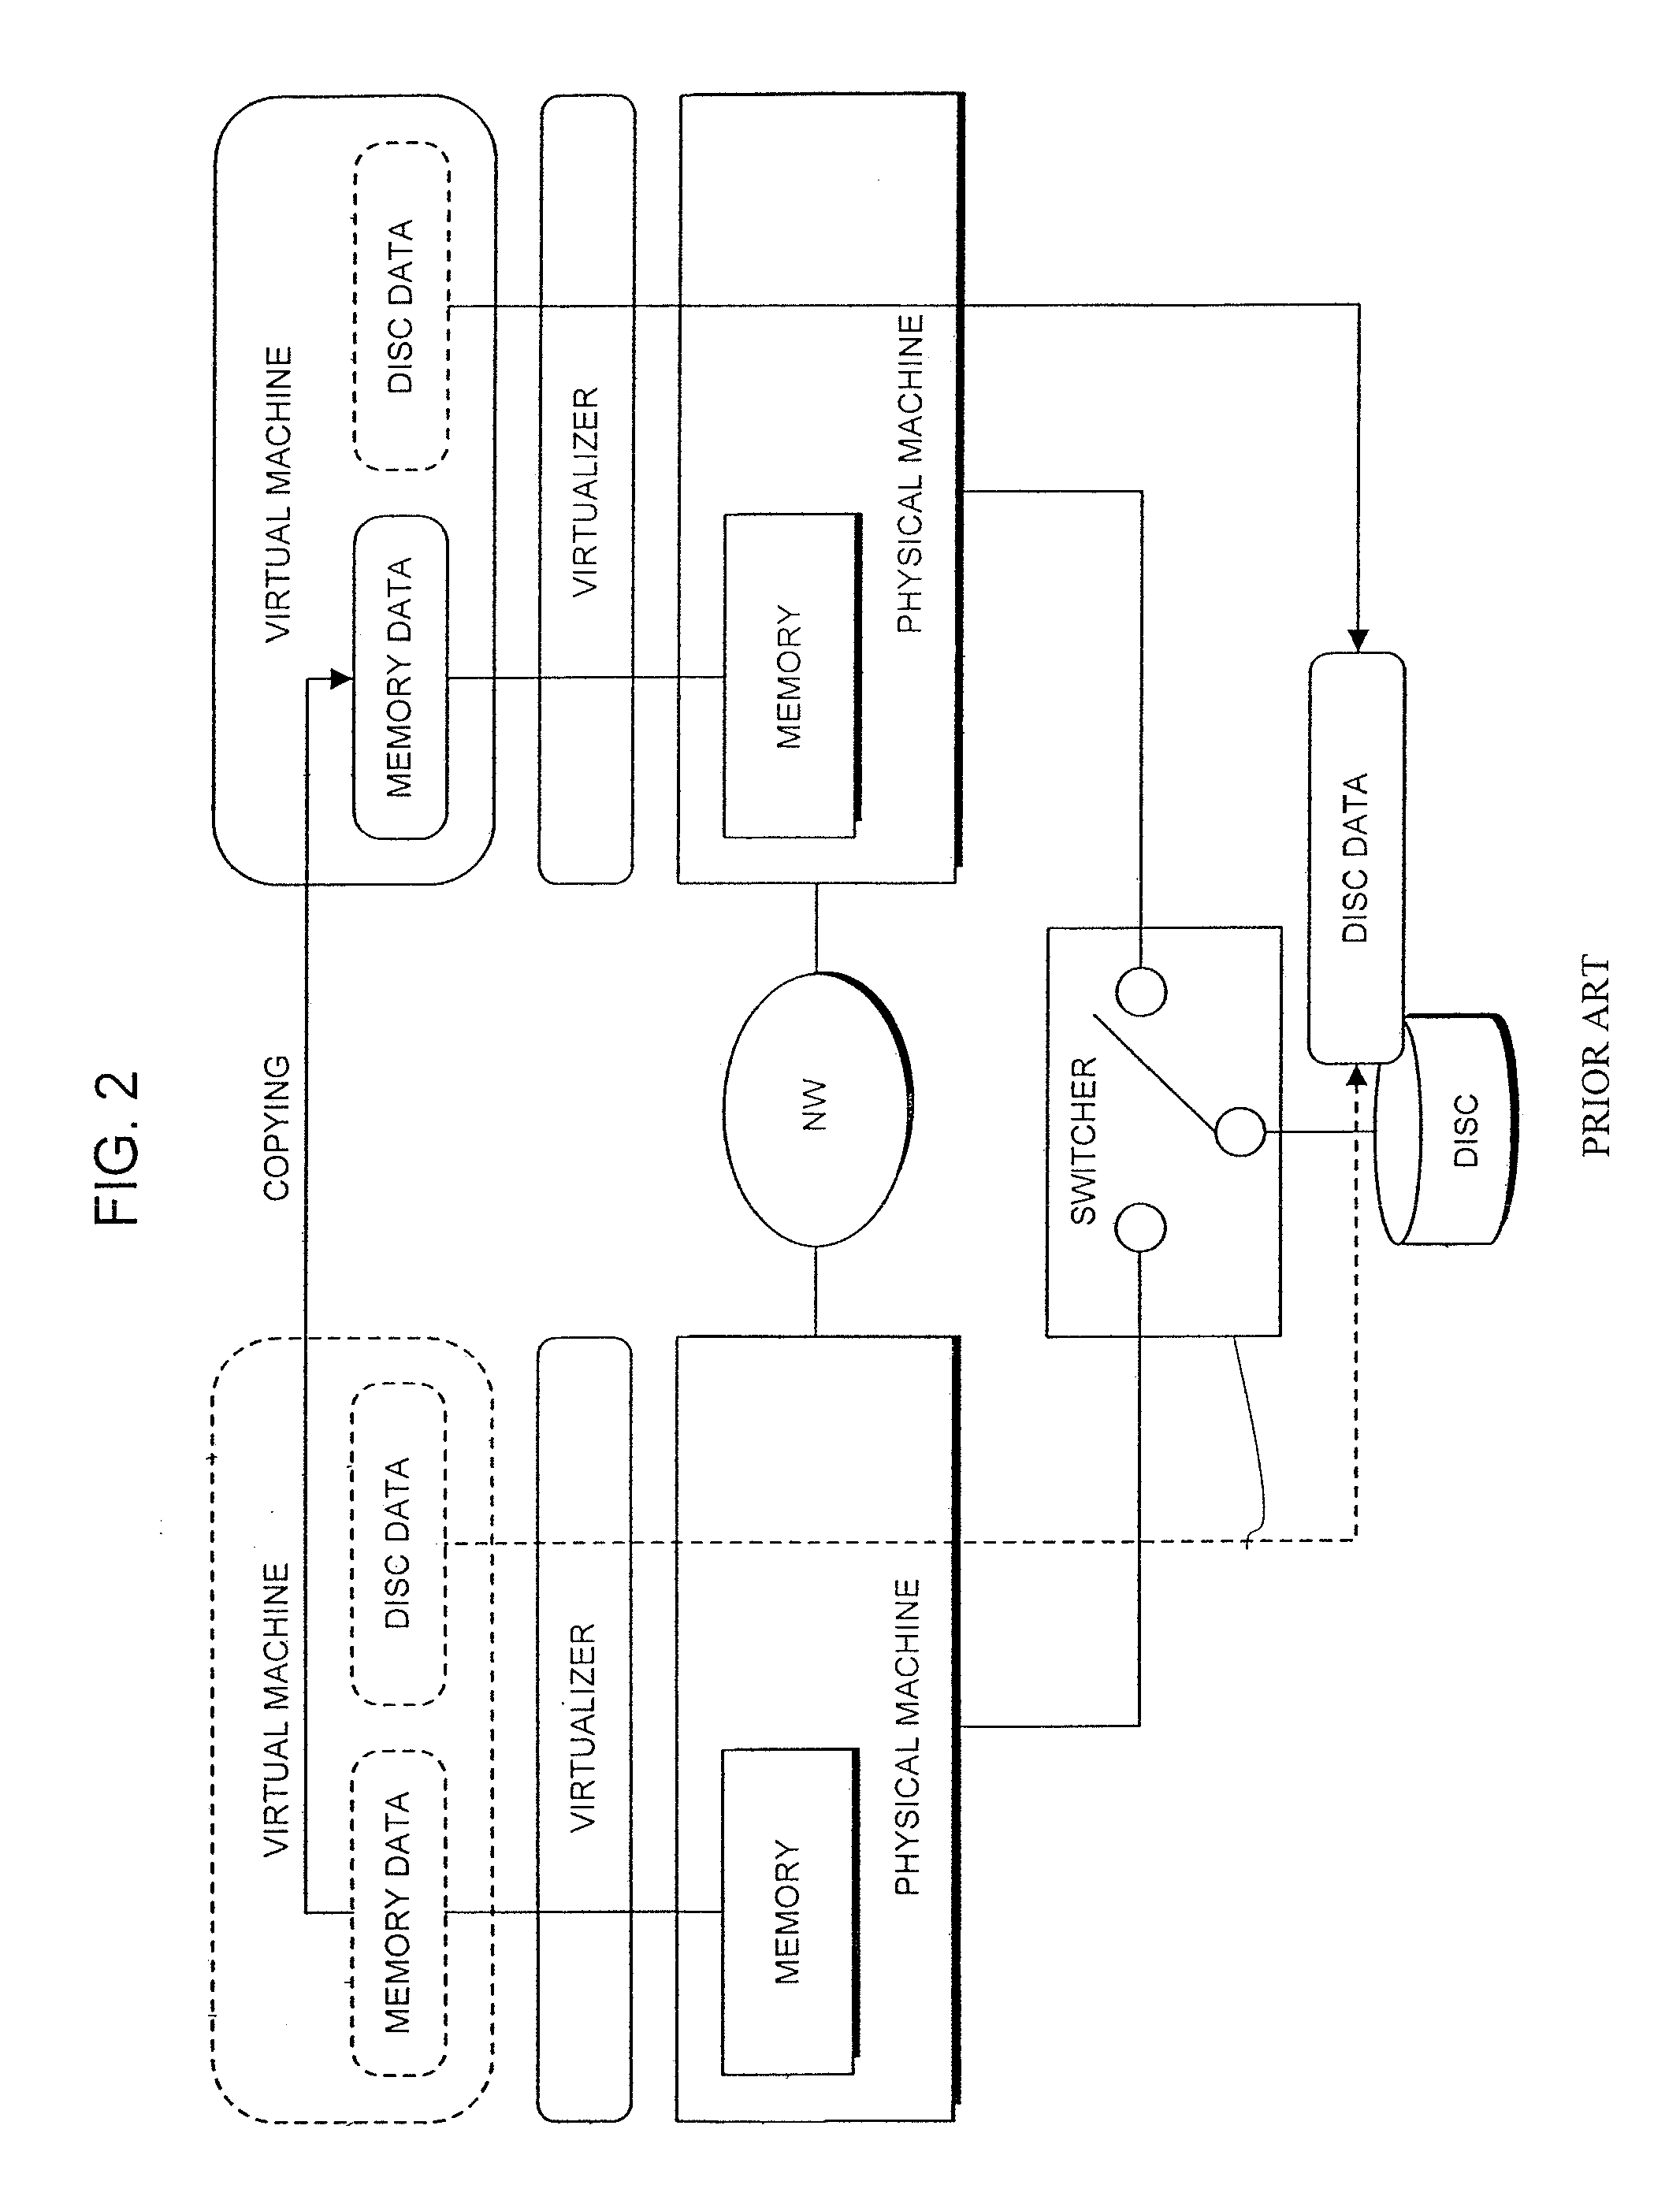 Dynamic physical resource allocation in a networked system for migrating virtual computers